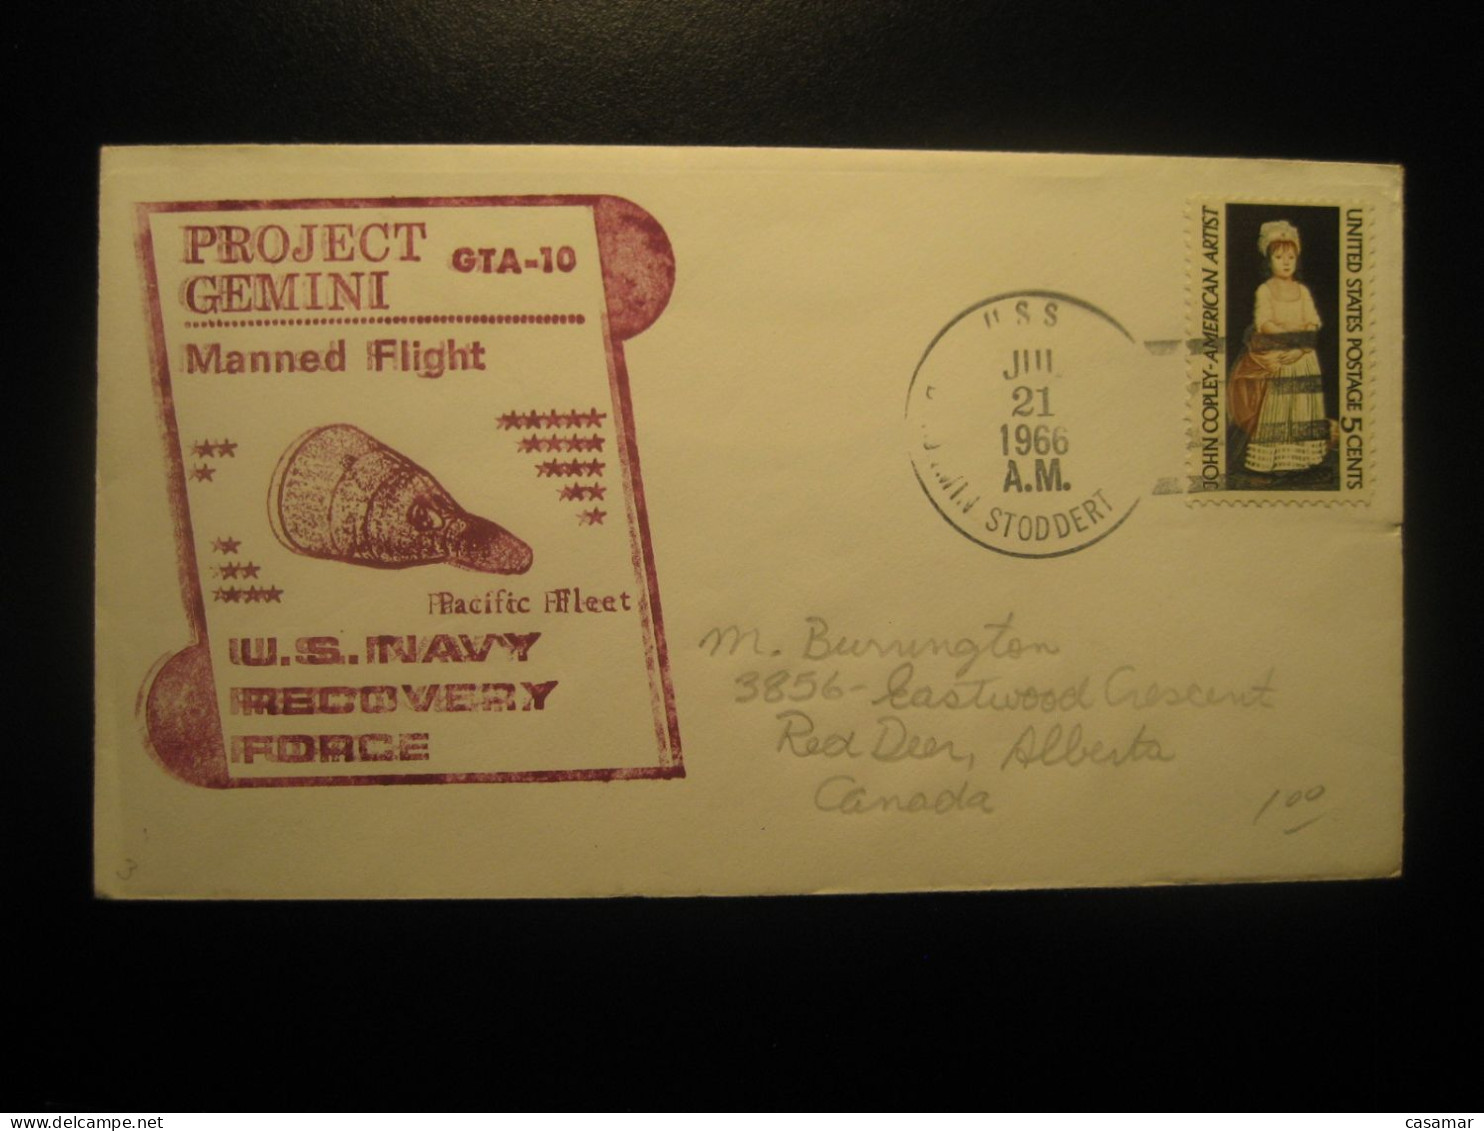 PROJECT GEMINI Pacific Fleet GTA10 Manned Flight US Navy Recovery Force USS STODDERT 1966 Cancel Cover USA Space Spatial - Verenigde Staten